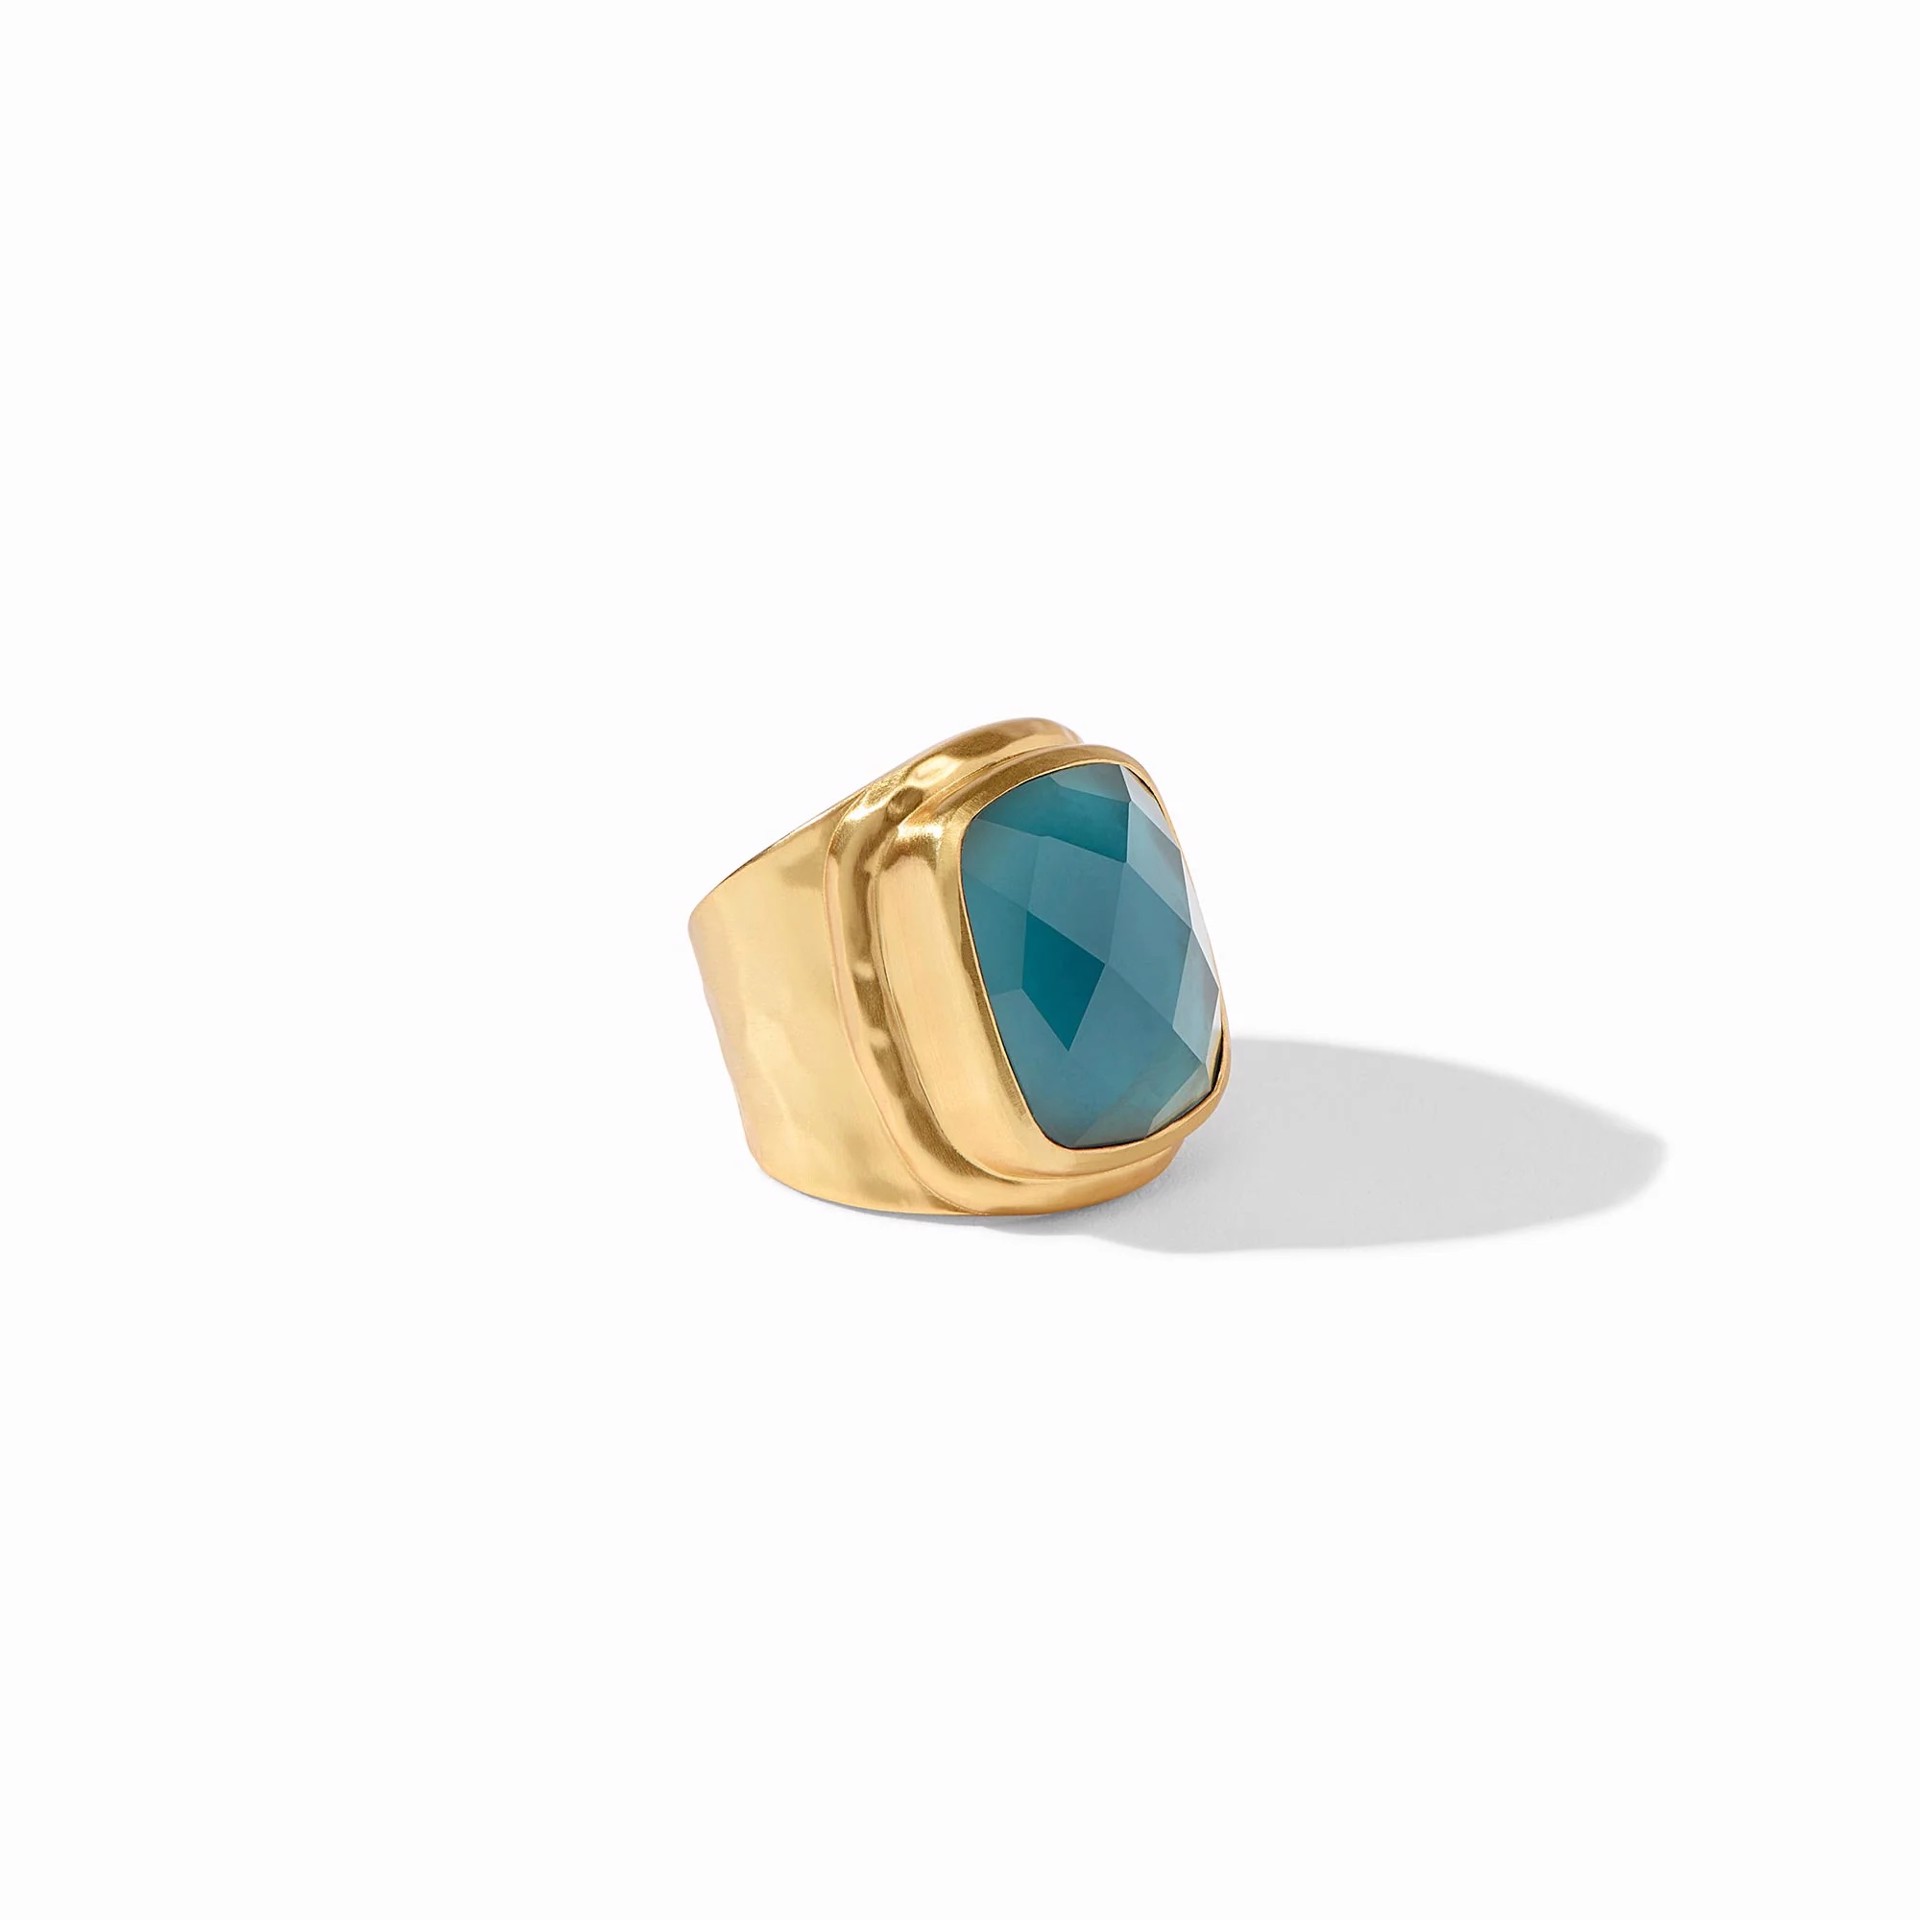 Tudor Statement Ring - Peacock Blue by Julie Vos